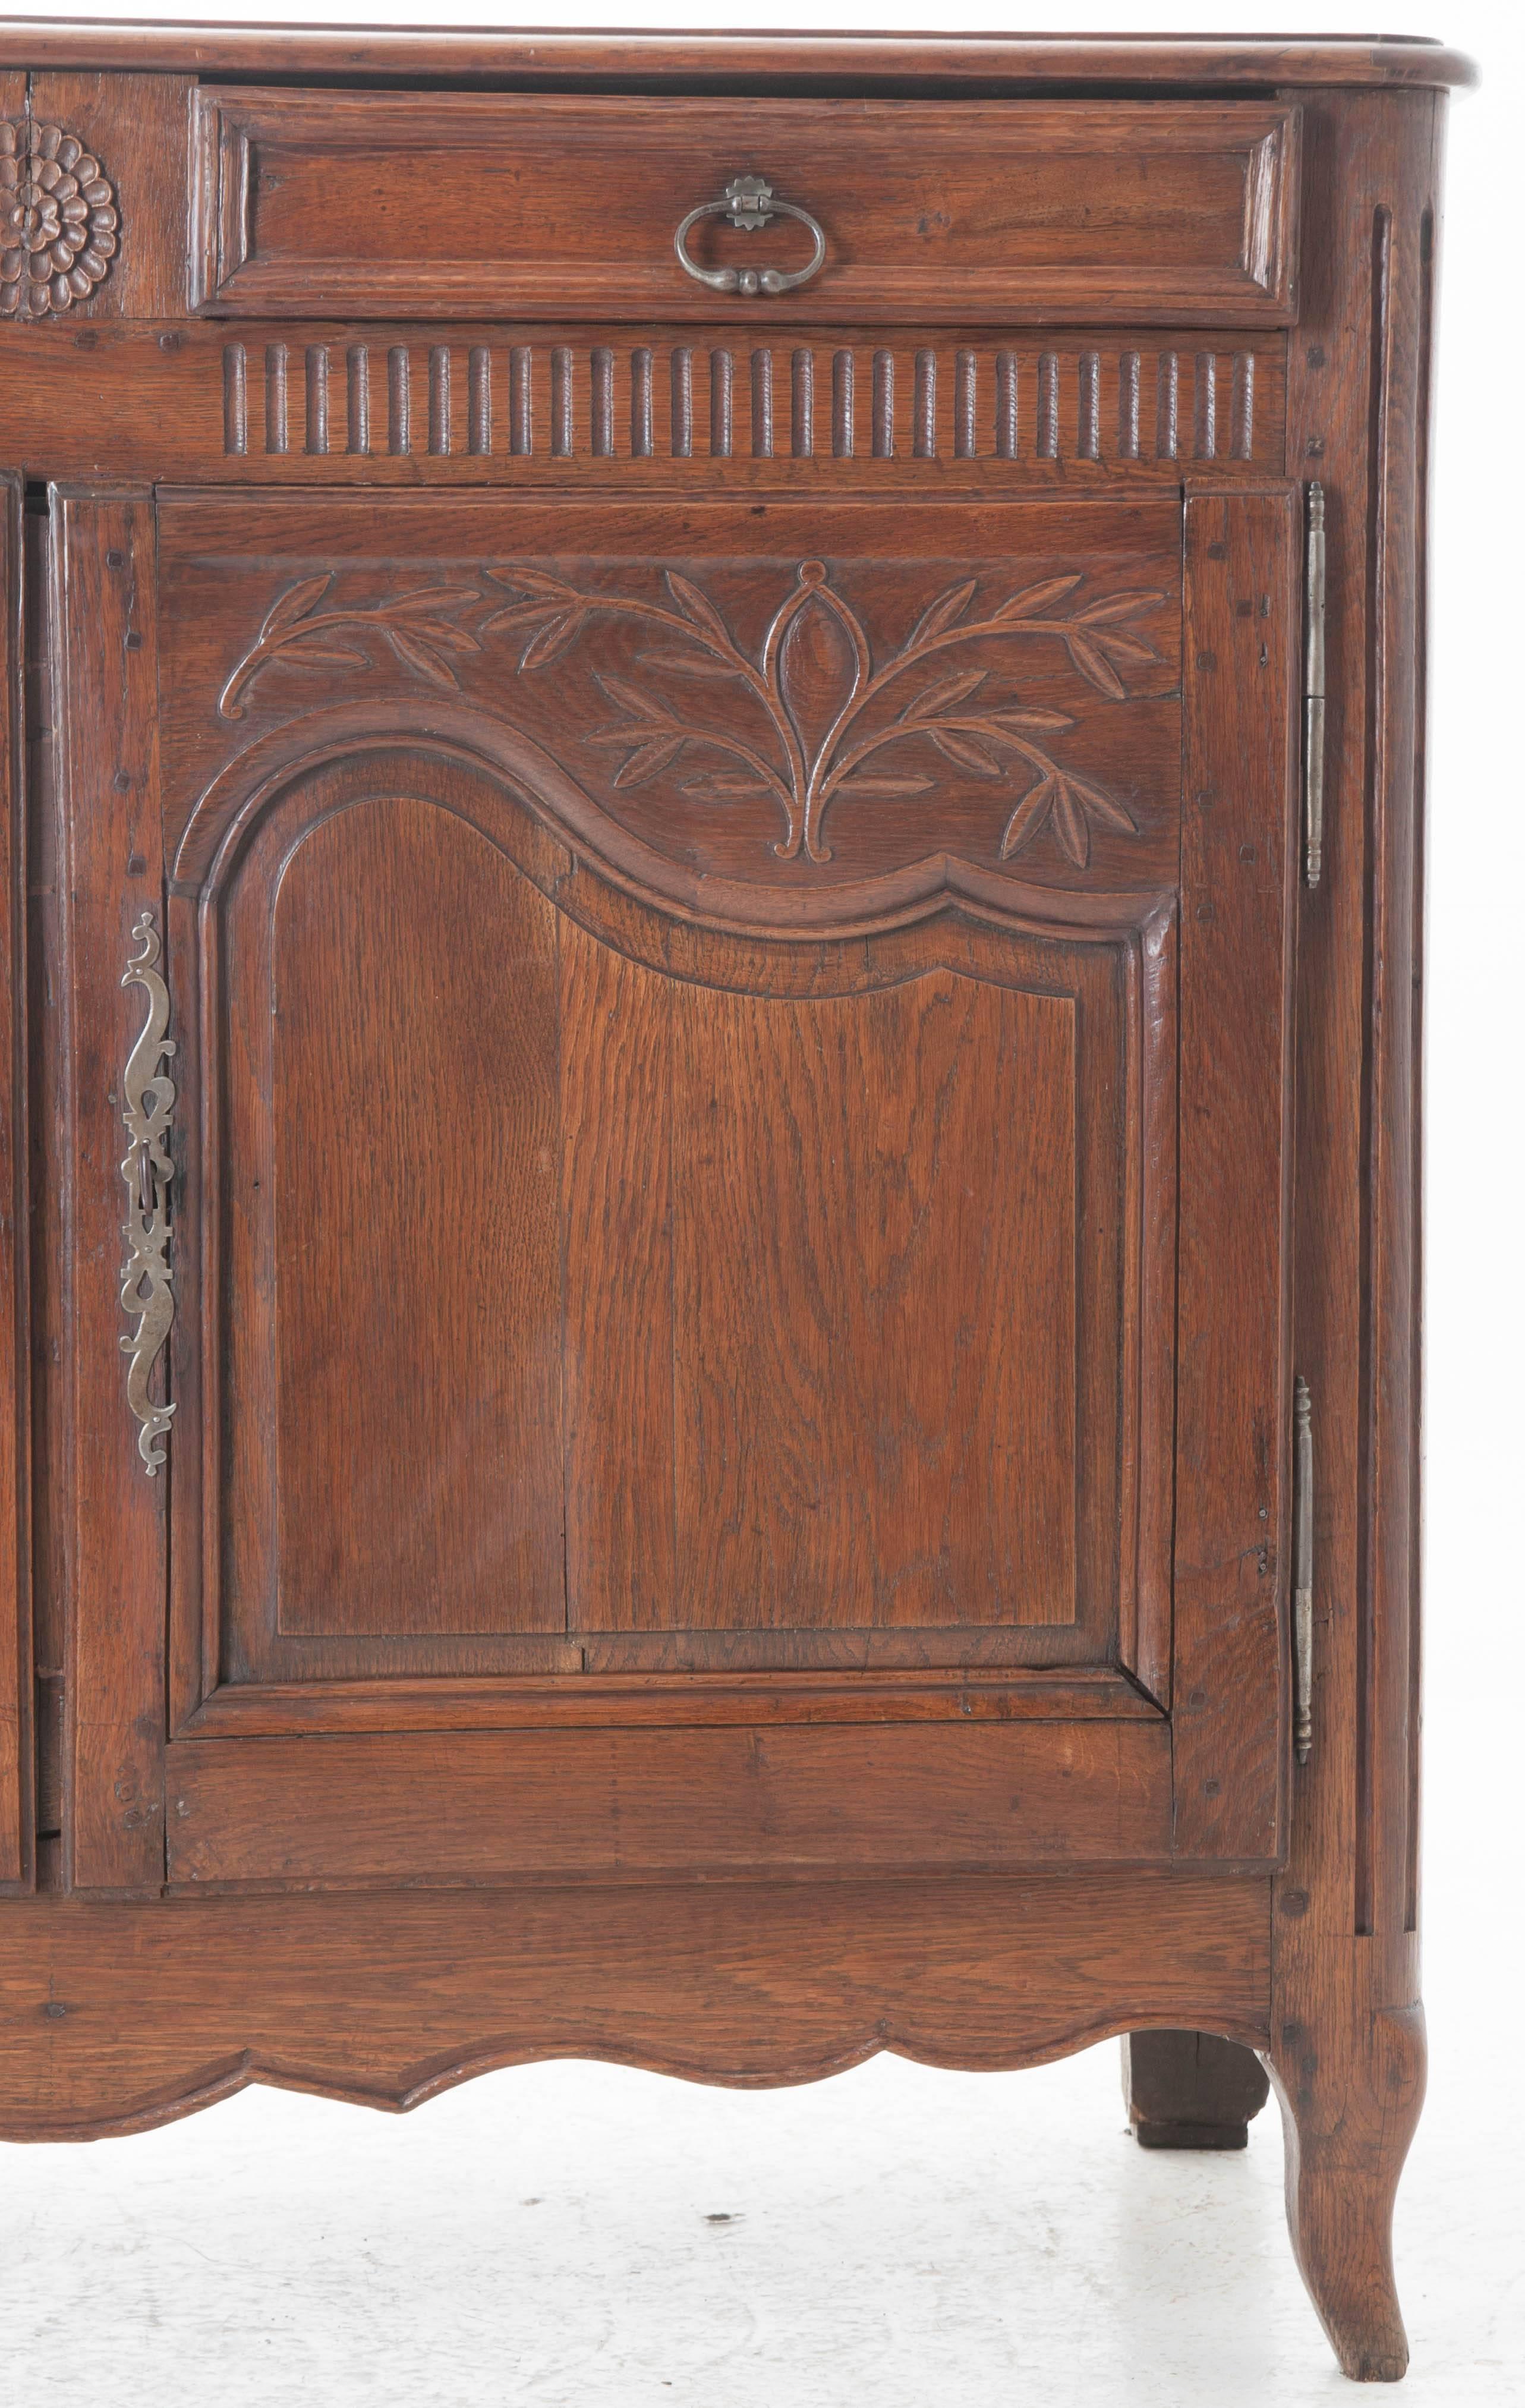 A fabulous 18th century French buffet constructed of brilliantly aged solid oak. Two drawers sporting their original pulls are separated from one another by a meticulously carved, radiating flower, and are separated from the doors they surmount by